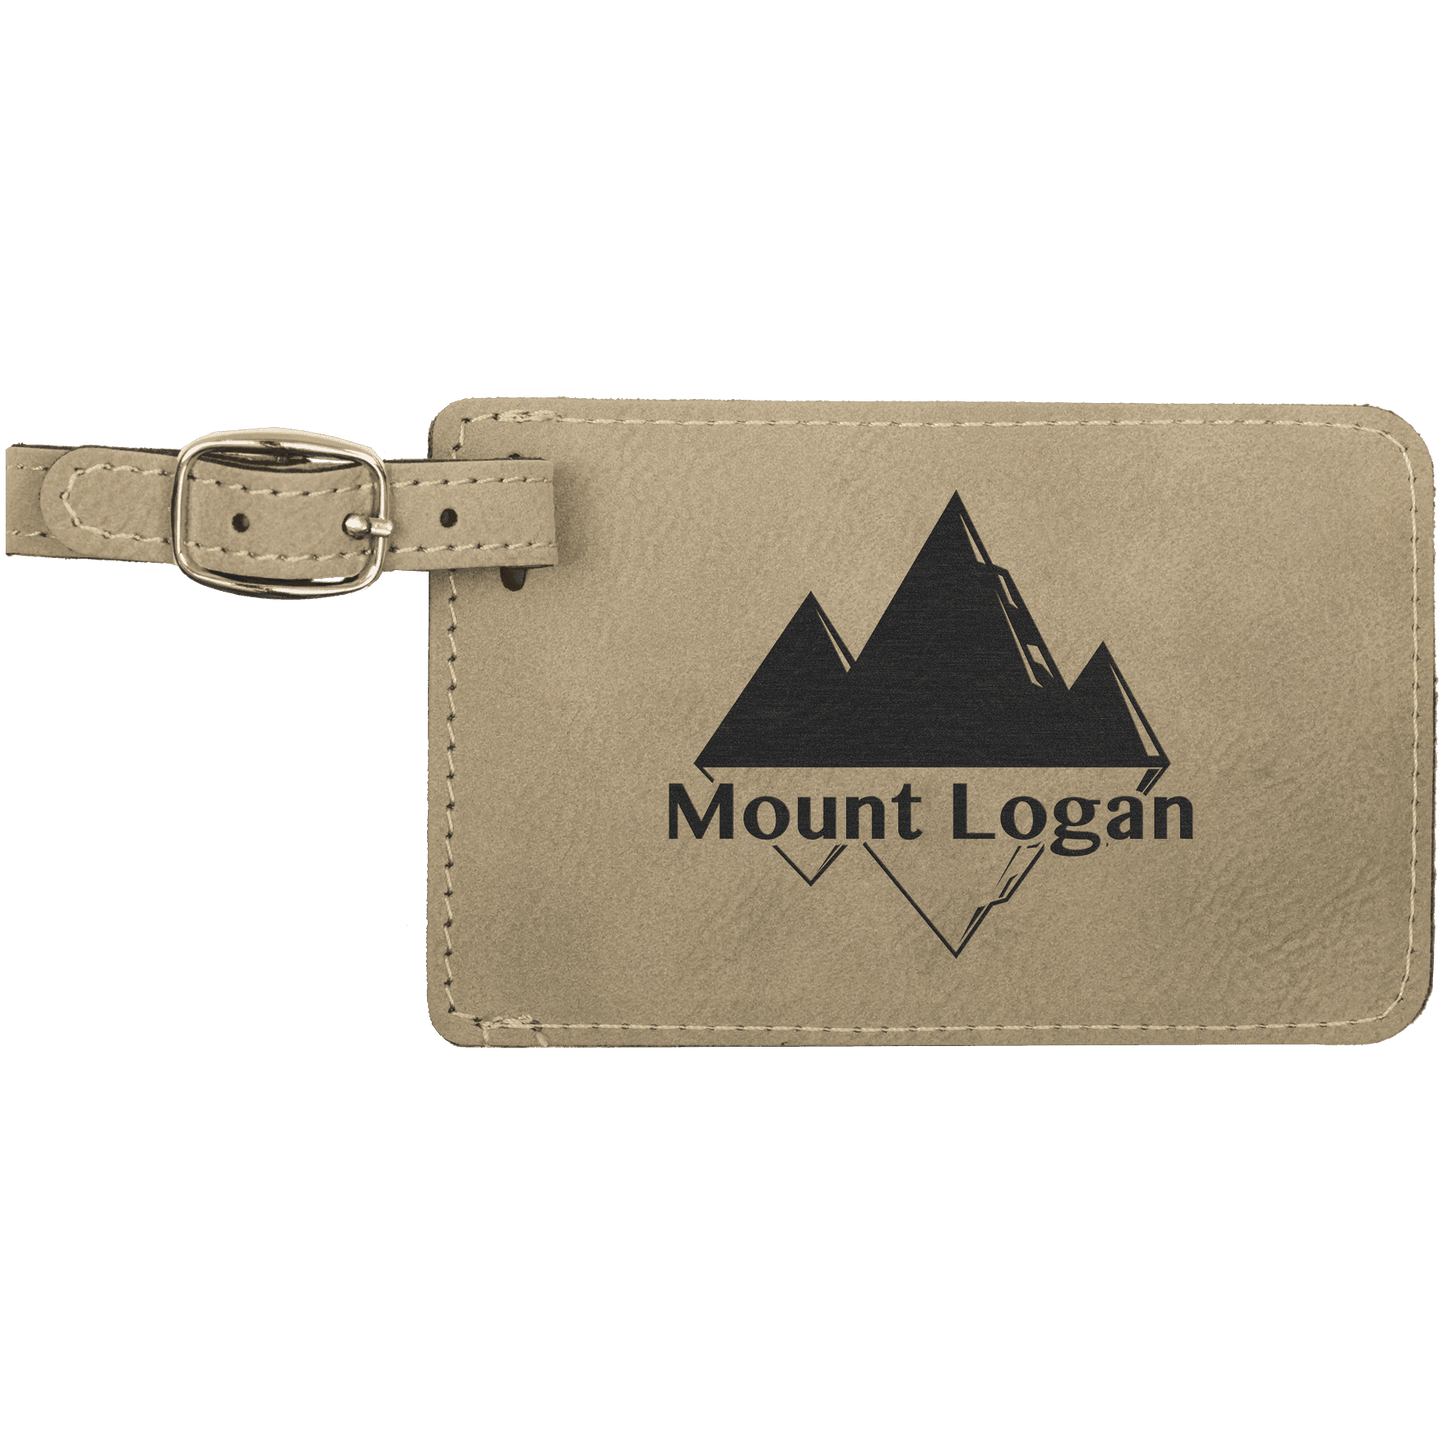 4 1/4" x 2 3/4" Light Brown Laserable Leatherette Luggage Tag